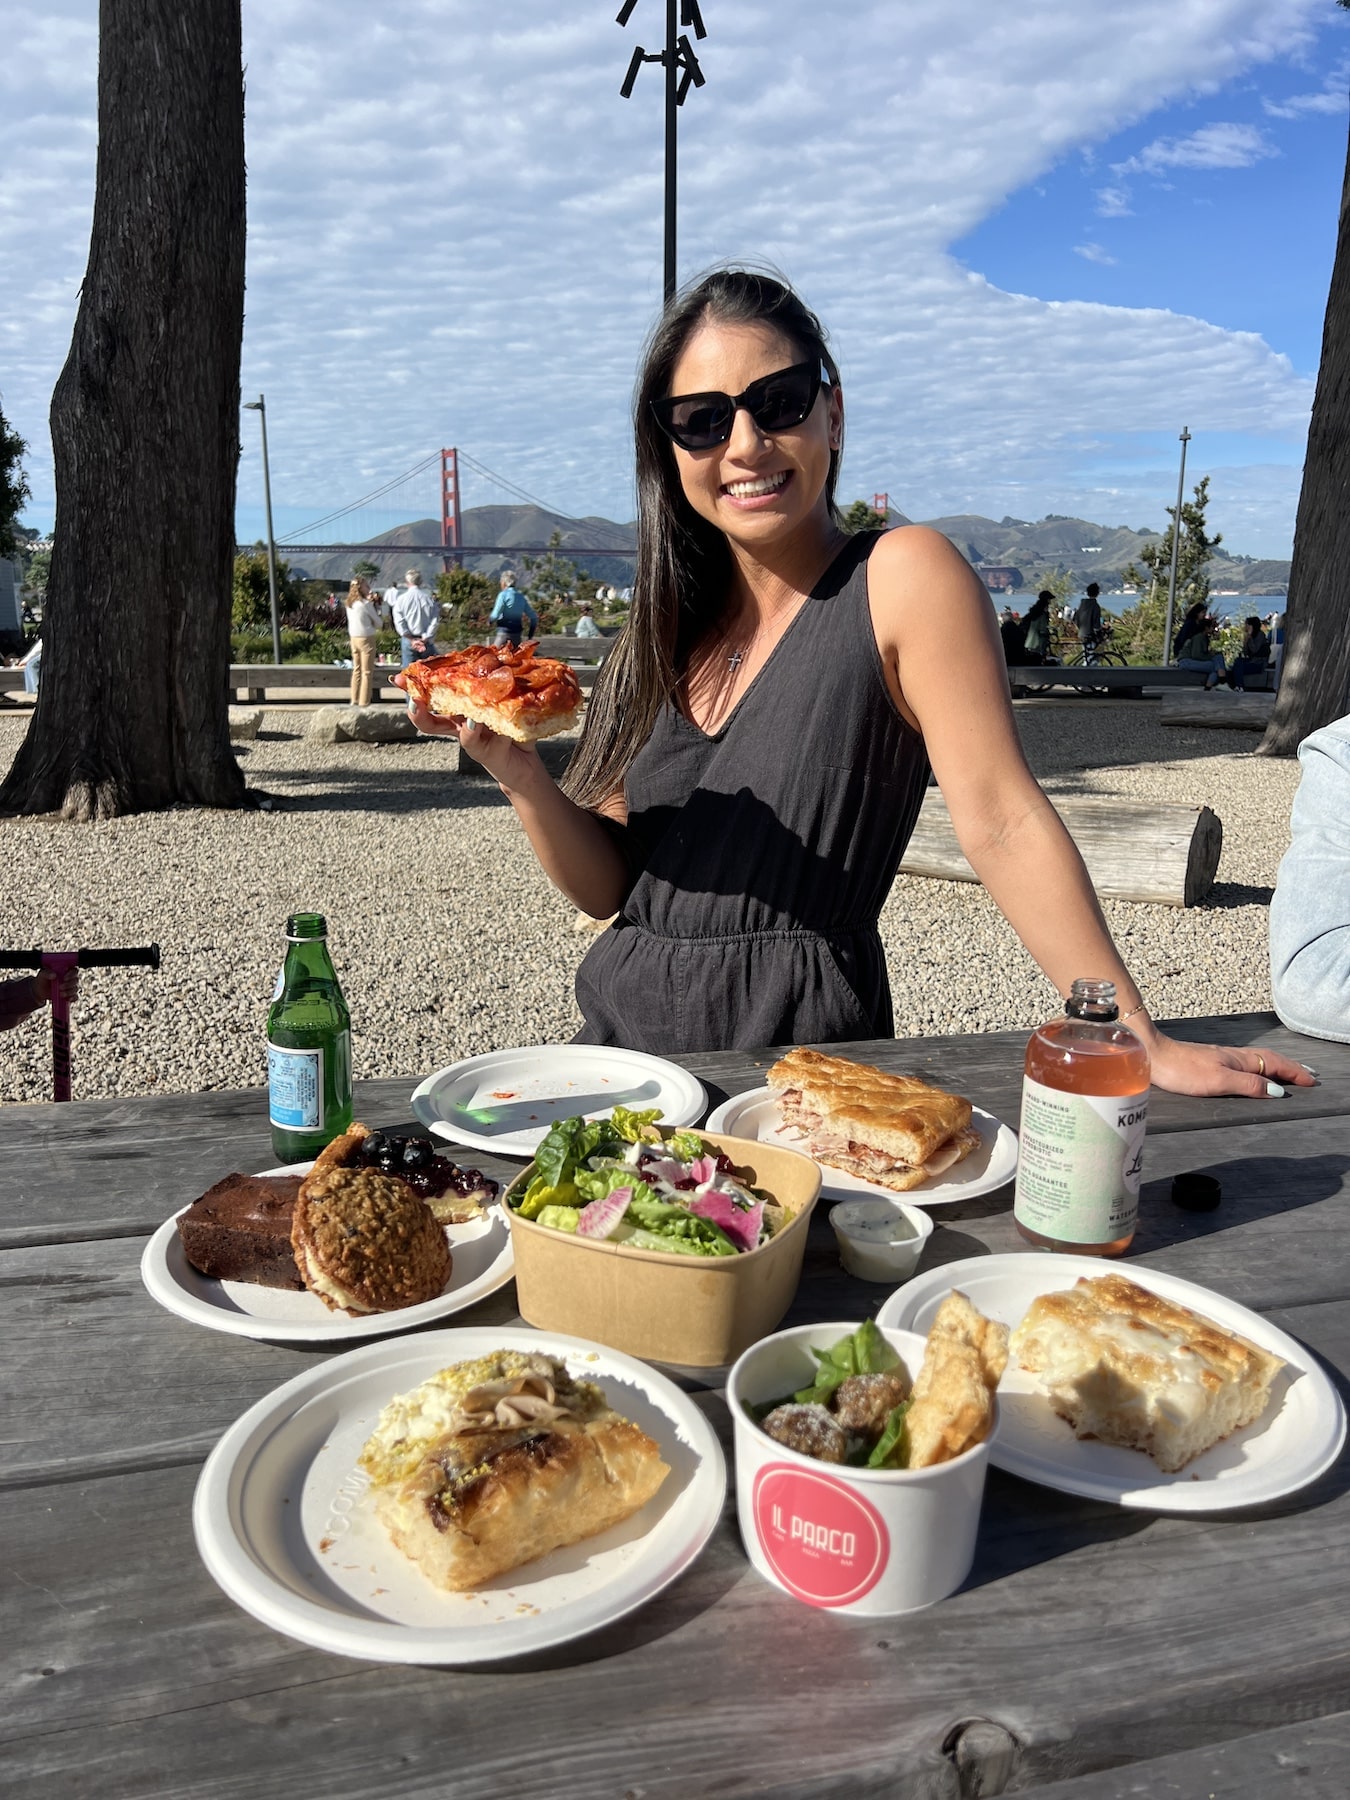 Lunch by the Golden Gate Bridge